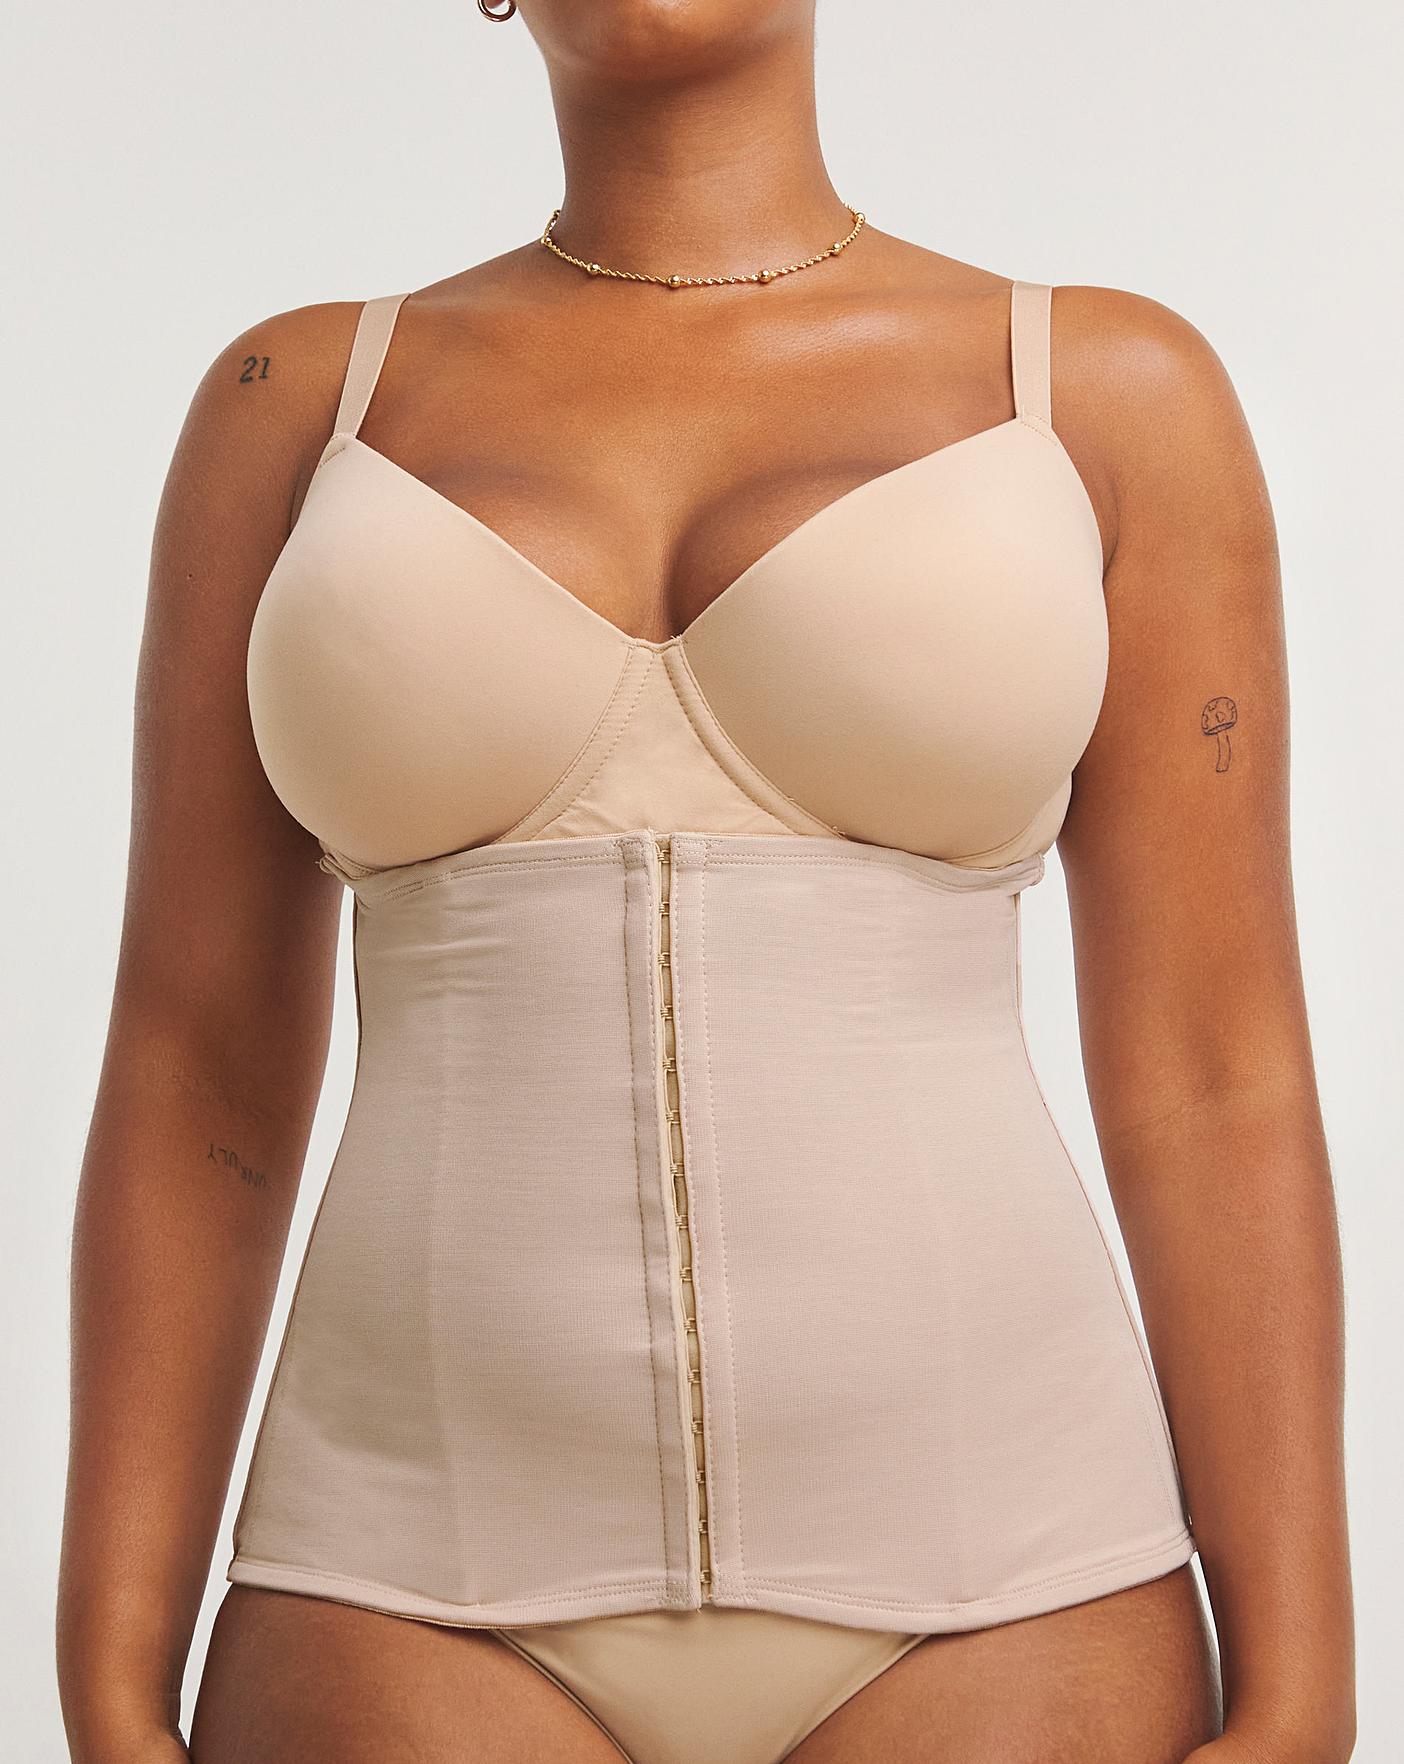 Miraclesuit Extra Firm Control Step In Waist Cincher, M, Nude